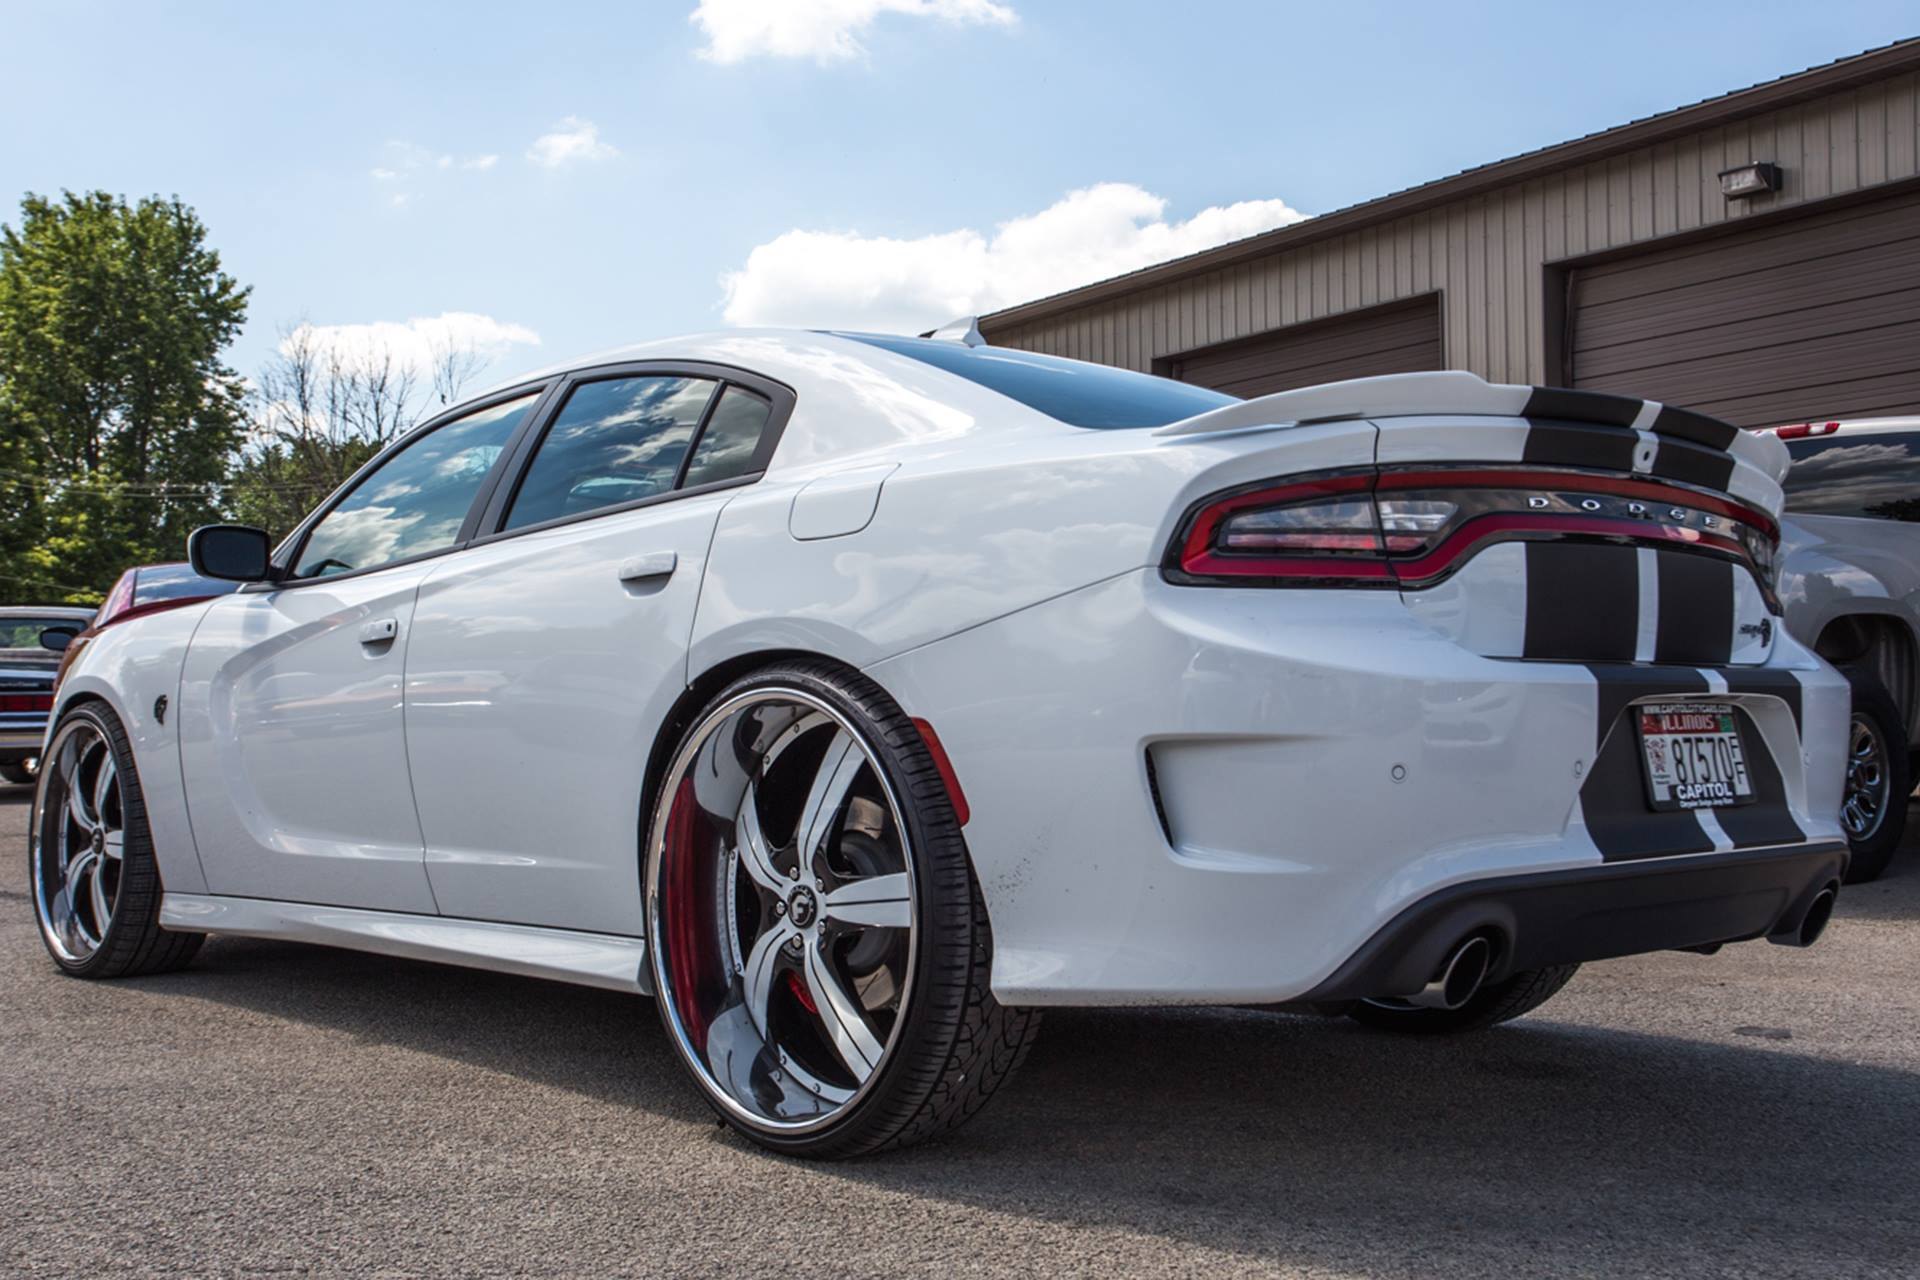 Custom Style Rear Spoiler on White Dodge Charger - Photo by Forgiato